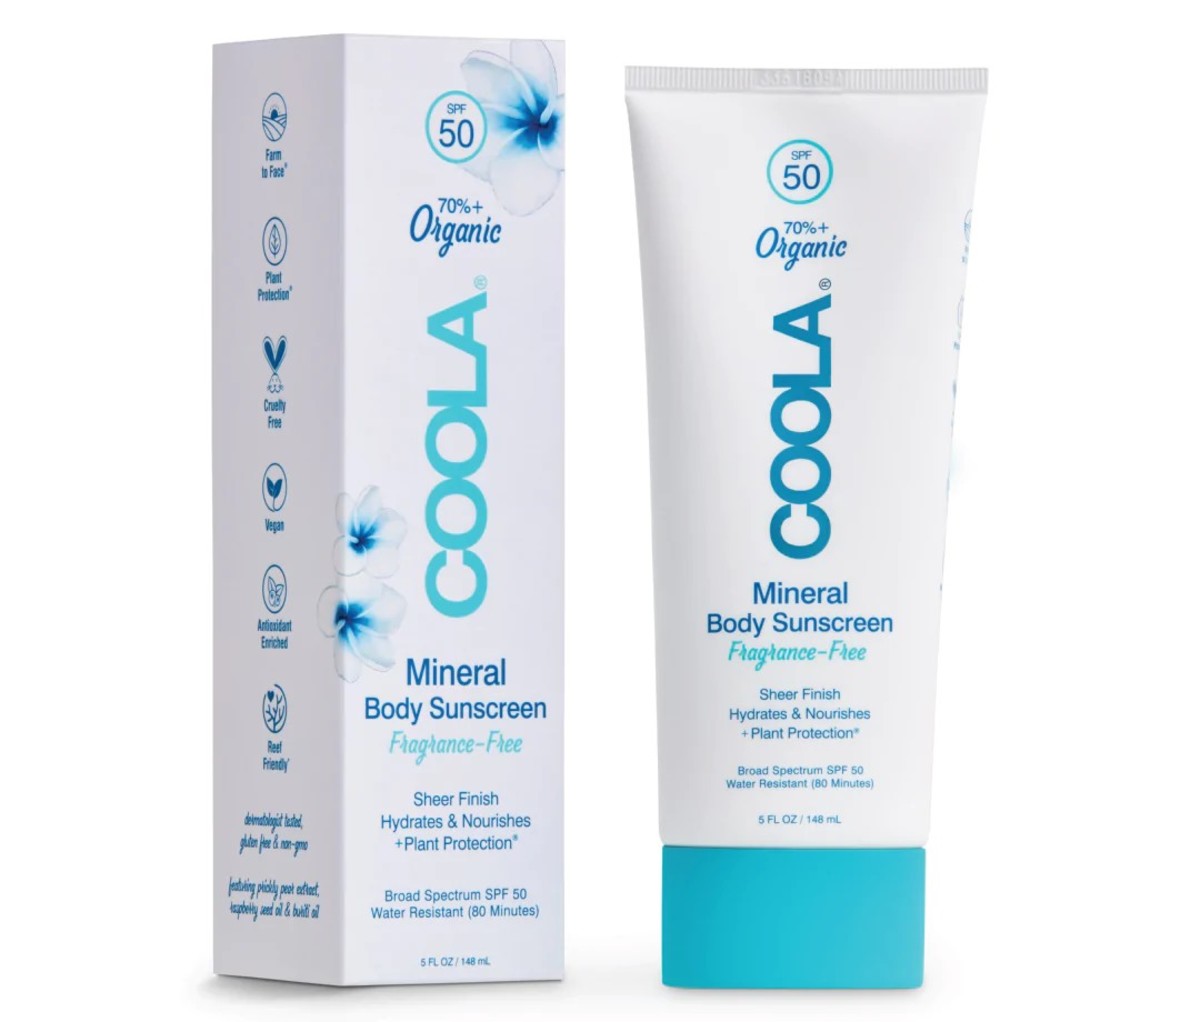 Box and tube of Coola Broad-Spectrum SPF 50 Mineral Body Sunblock